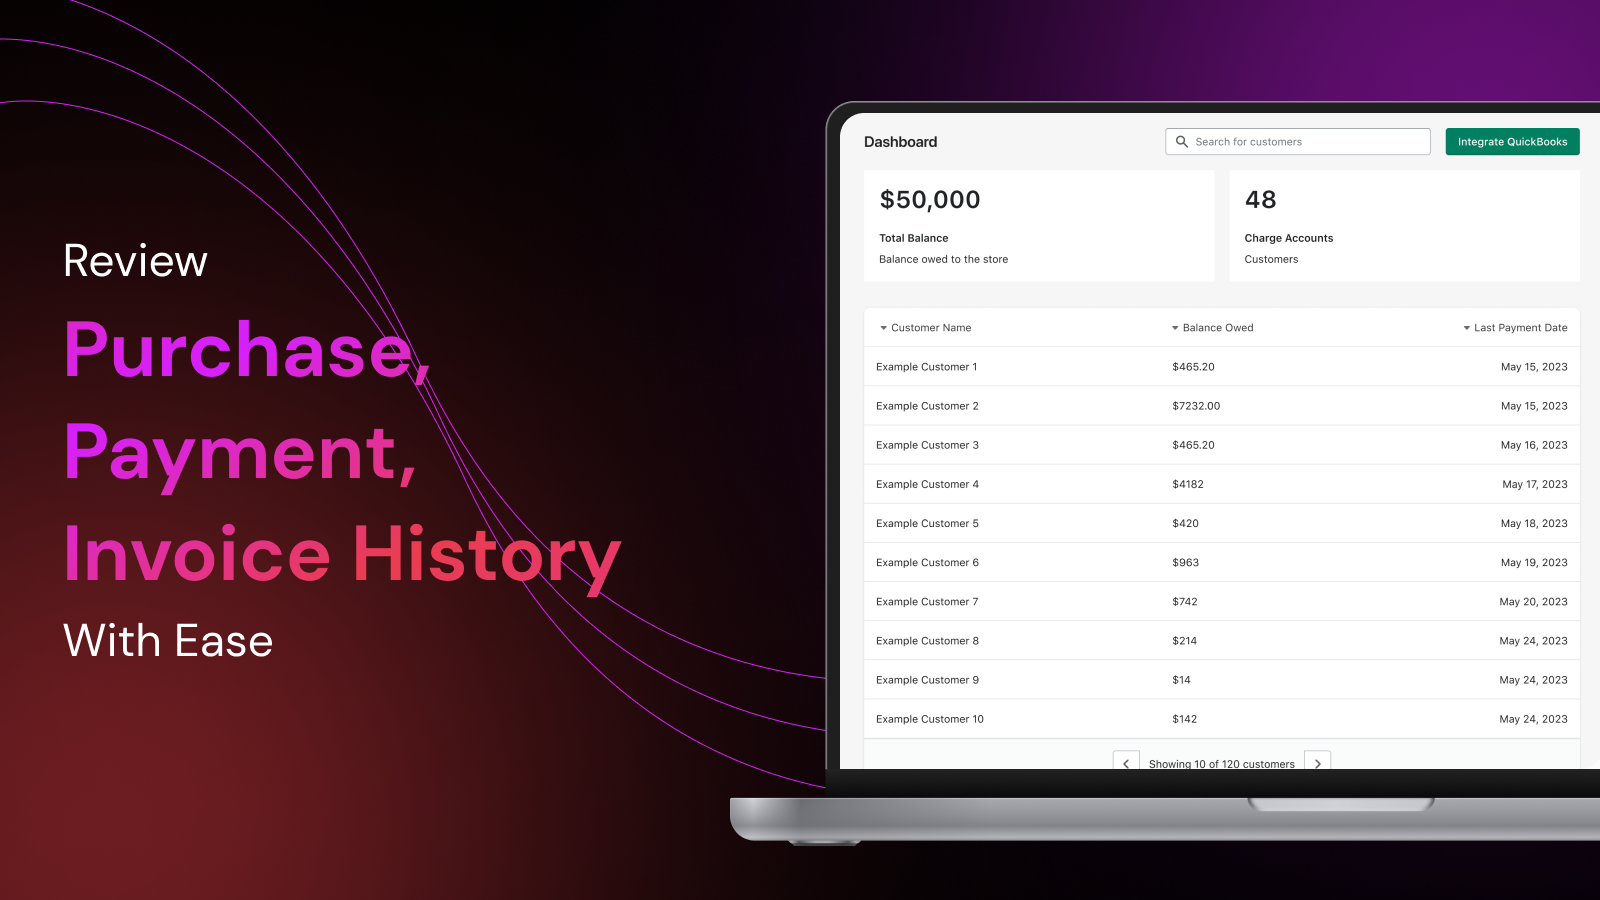 View purchase, payment, invoice history